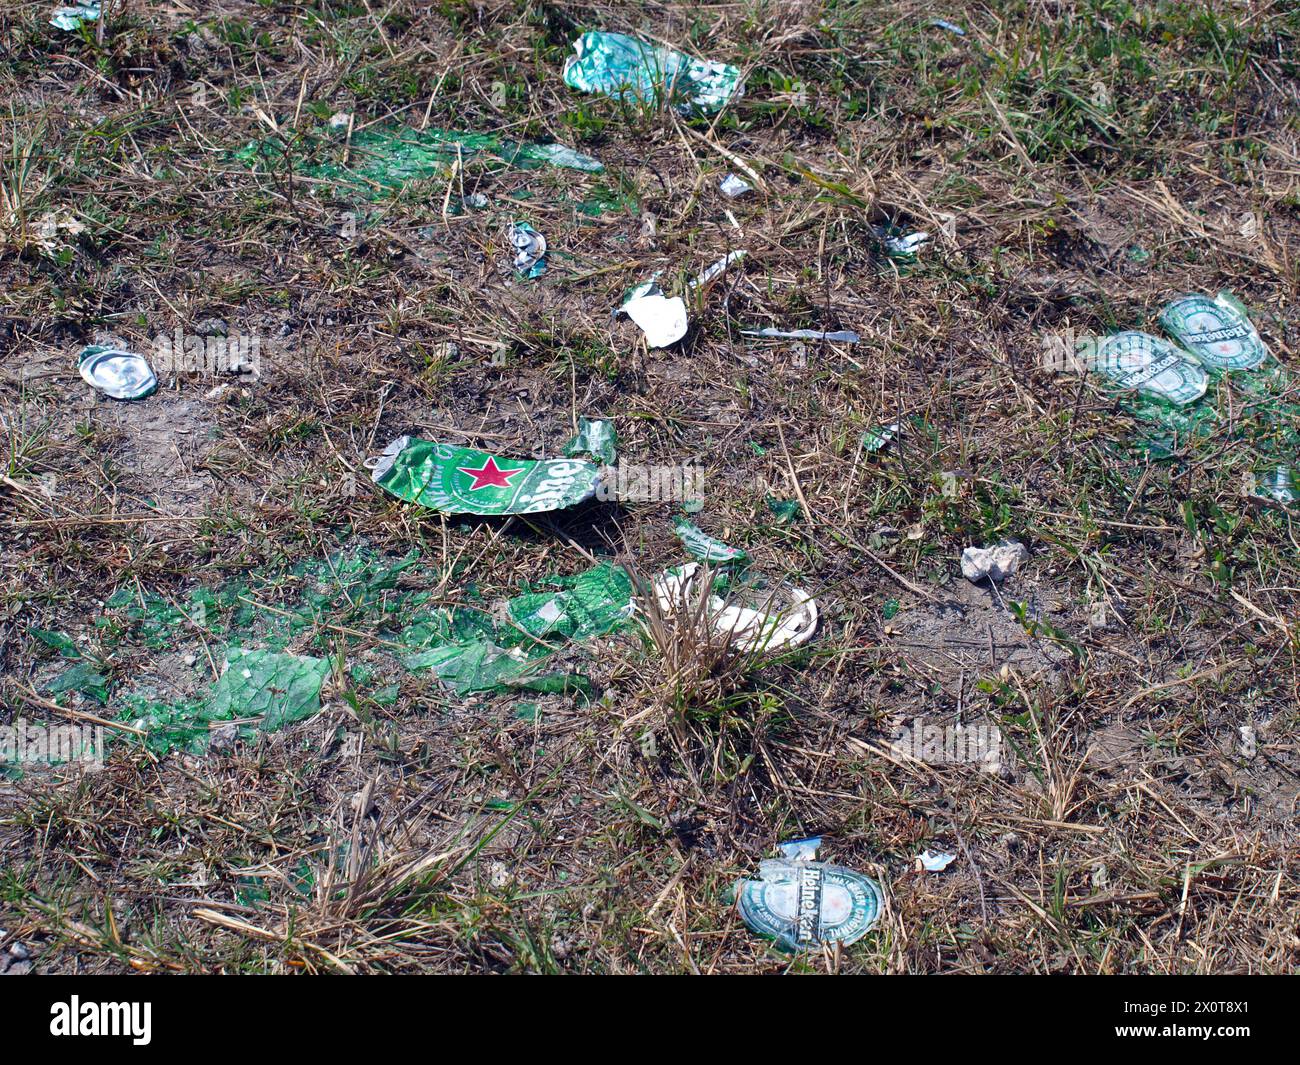 Miami, Florida, United States - March 16, 2024: Heineken beer containers trashing an area of the Everglades. Pollution problem in South Florida. Stock Photo